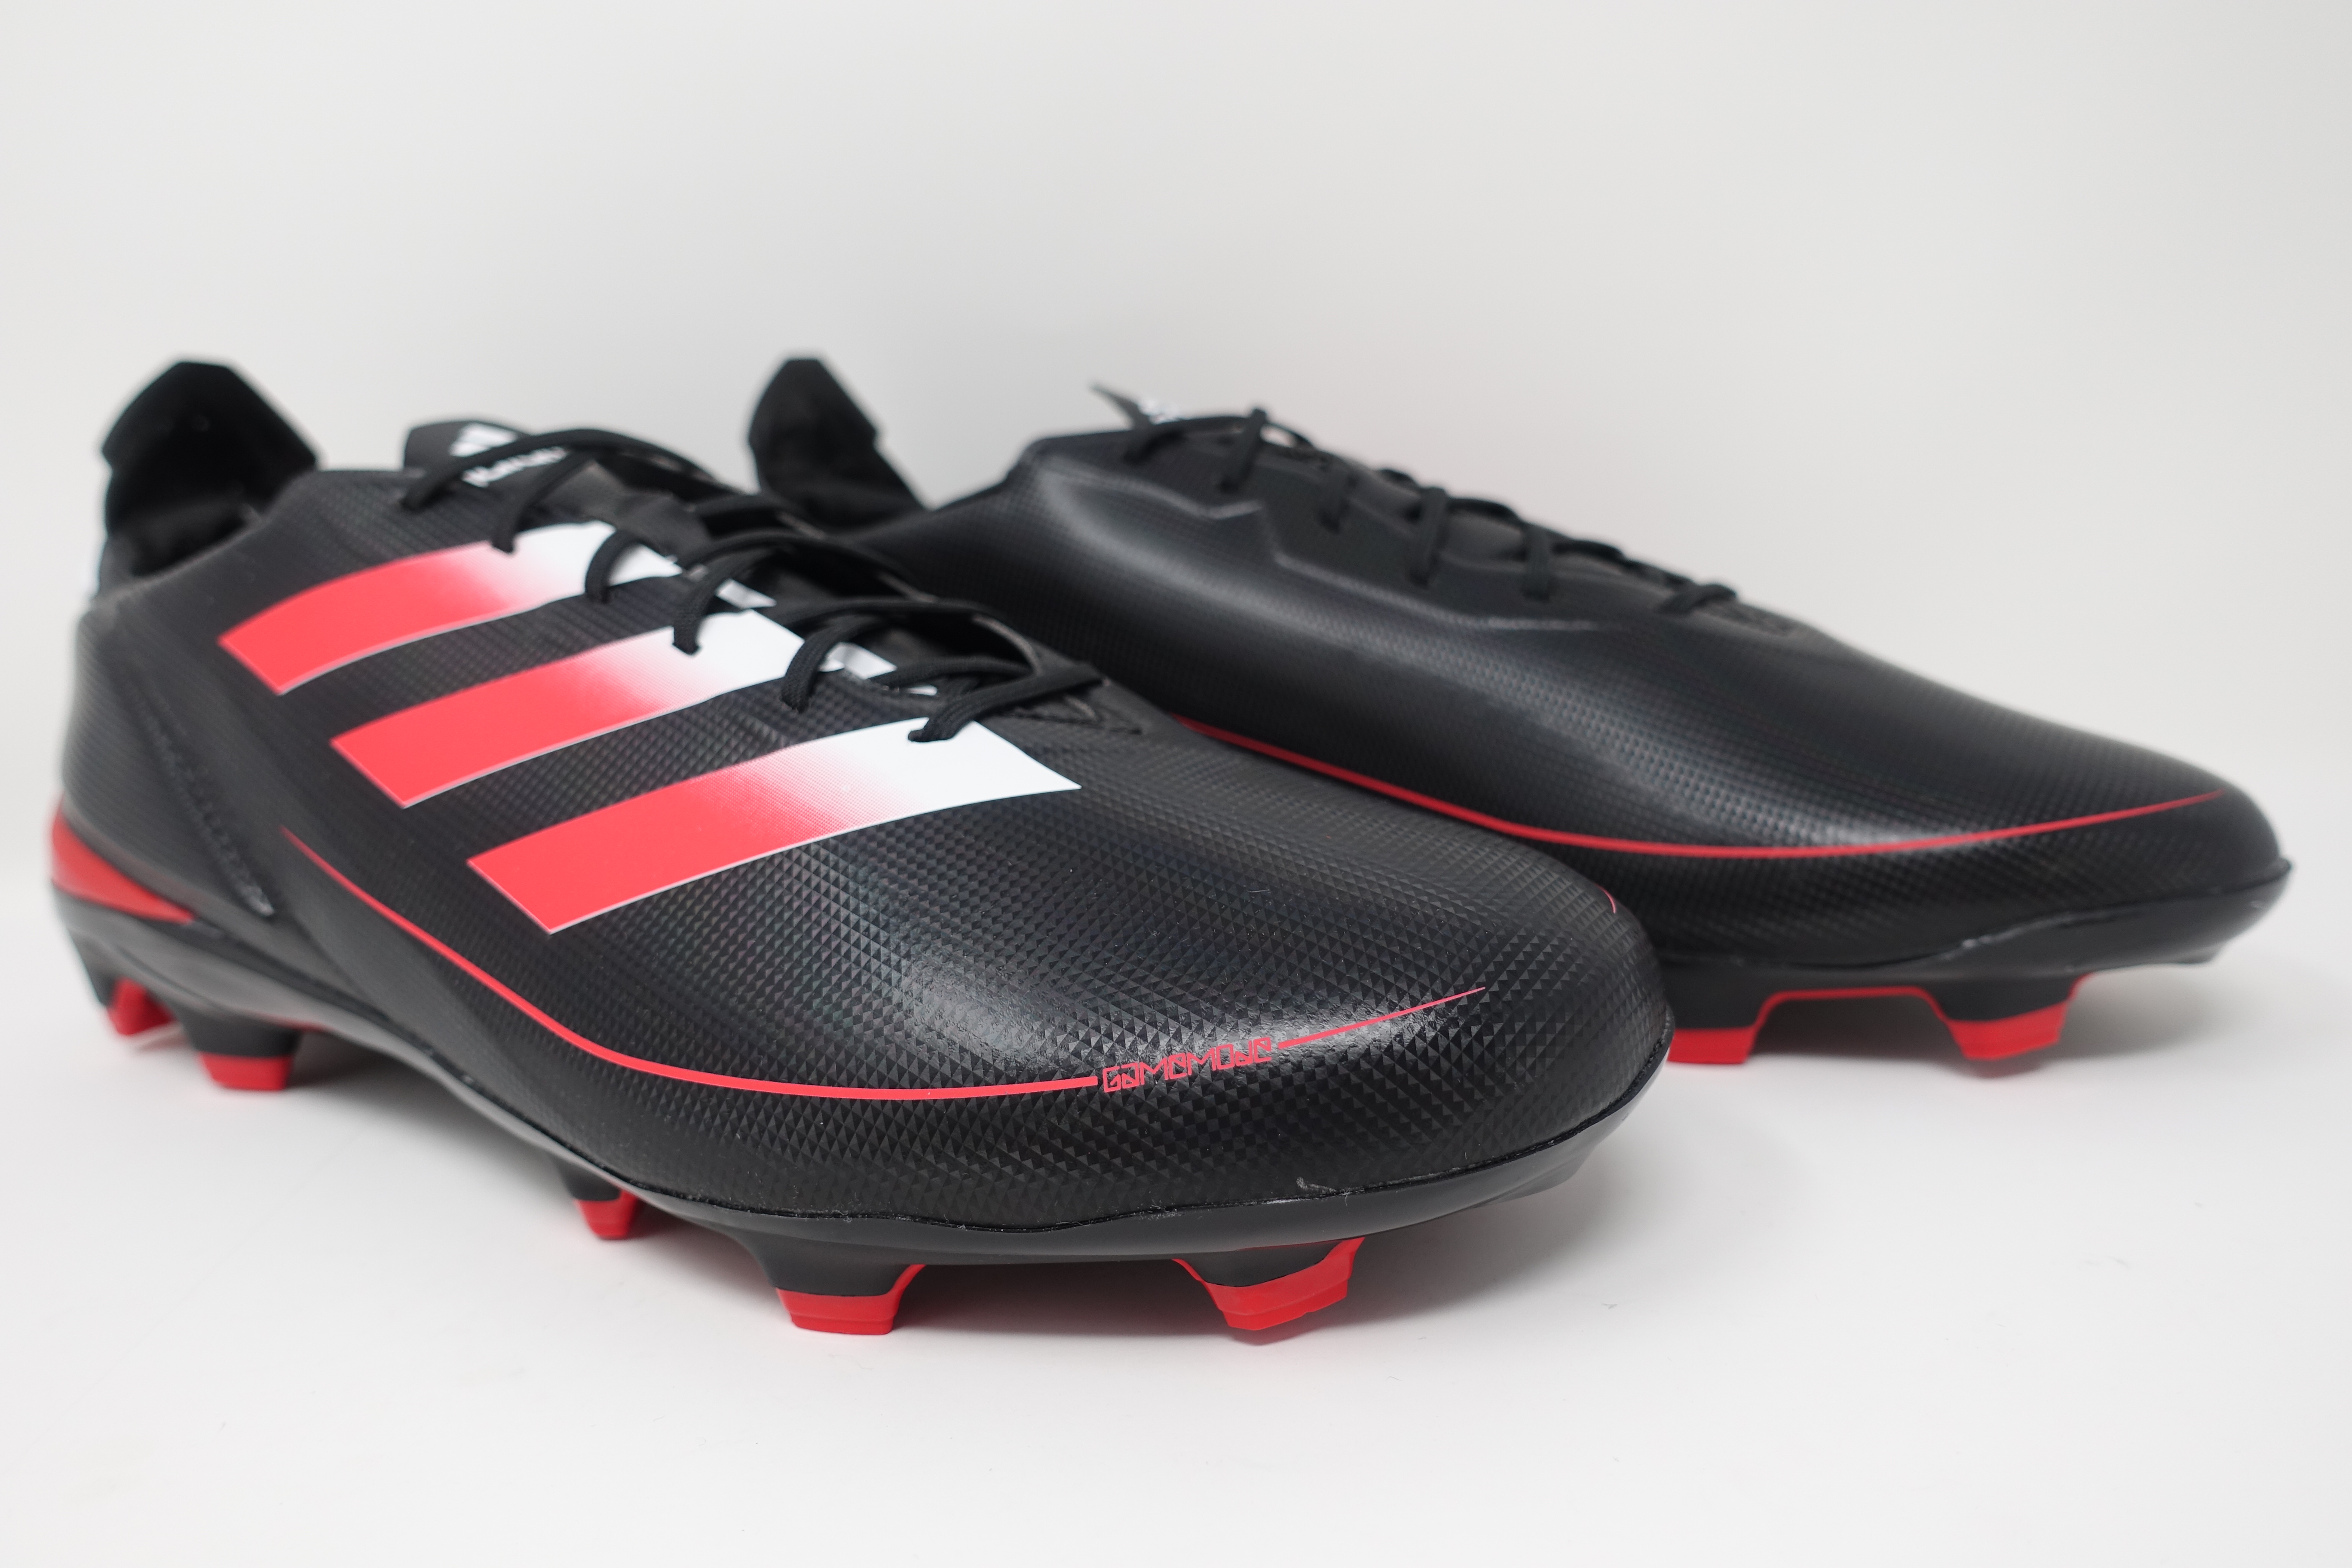 adidas-Gamemode-Synthetic-Color-Mode-Pack-Soccer-Football-Boots-2